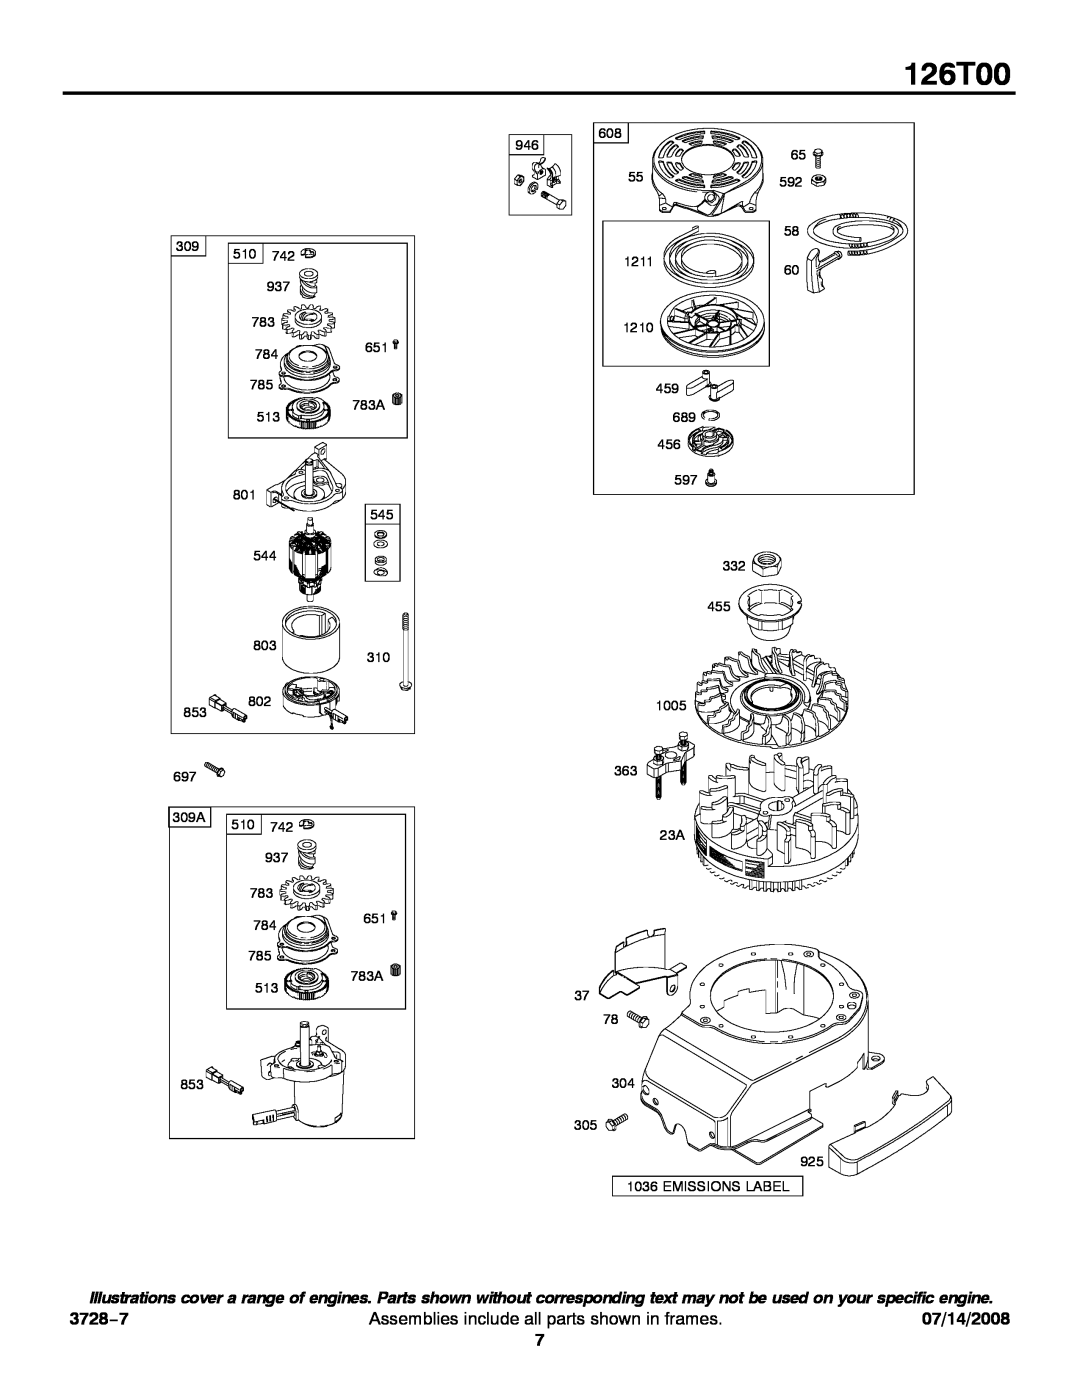 Snapper 126T00 service manual 3728−7, Assemblies include all parts shown in frames, 07/14/2008 